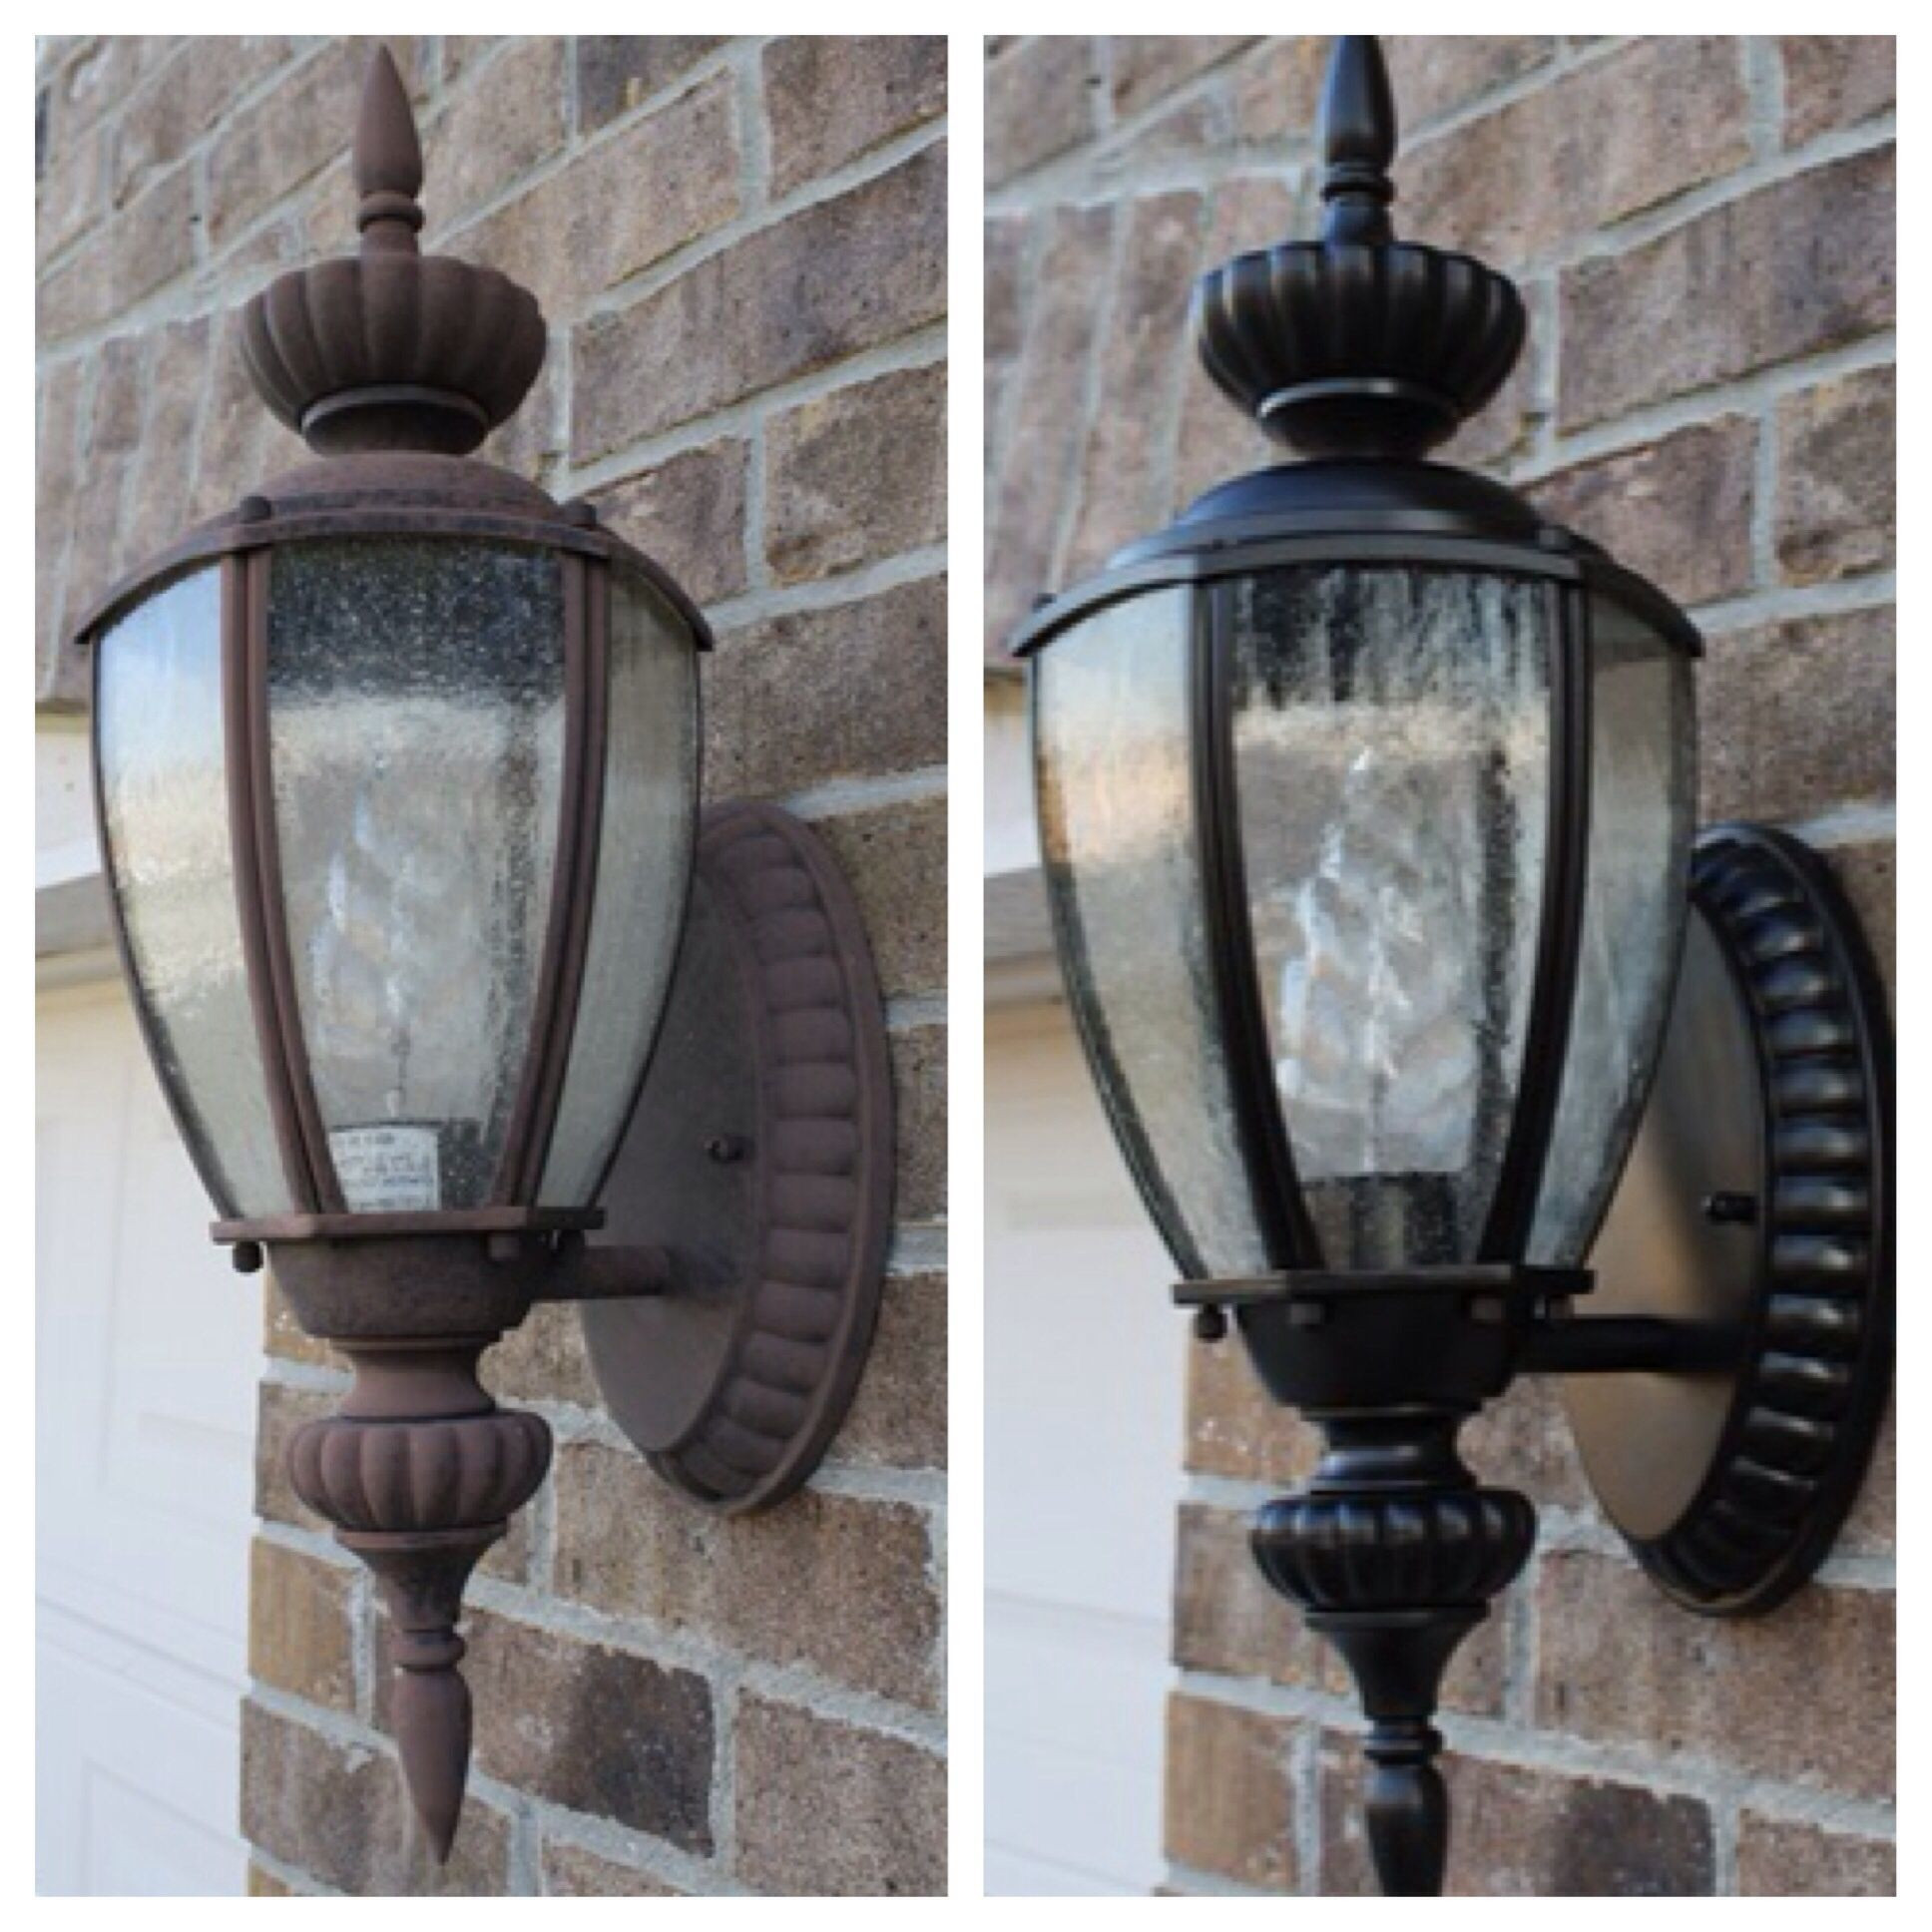 DIY Outdoor Light Fixture
 Making the old look new again with spray paint